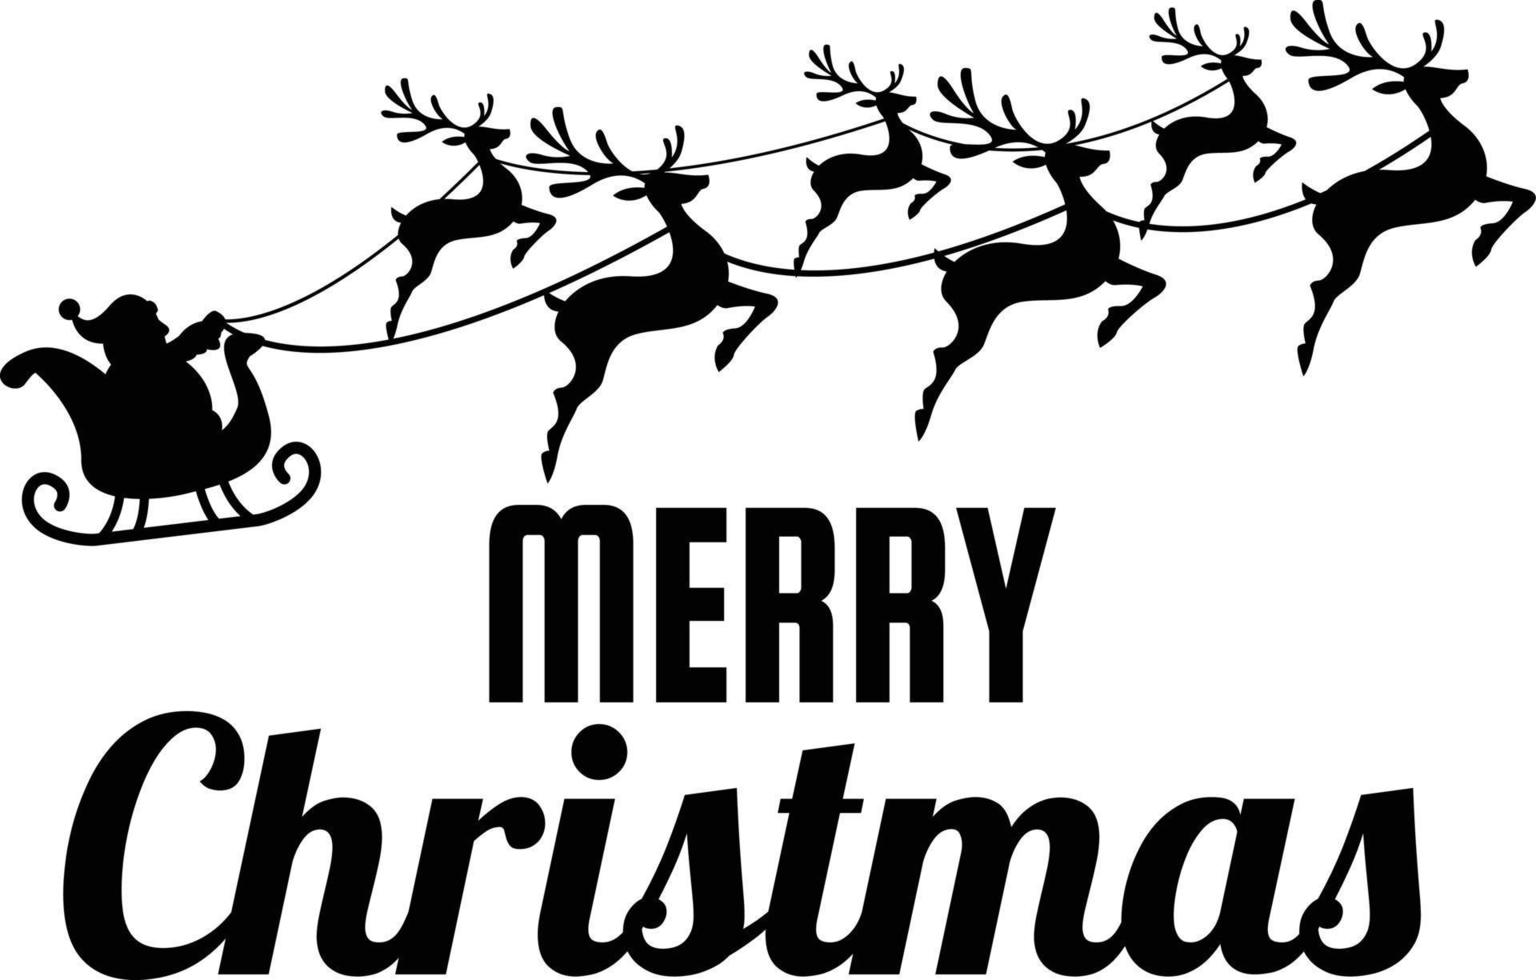 Merry Christmas lettering and quote illustration vector